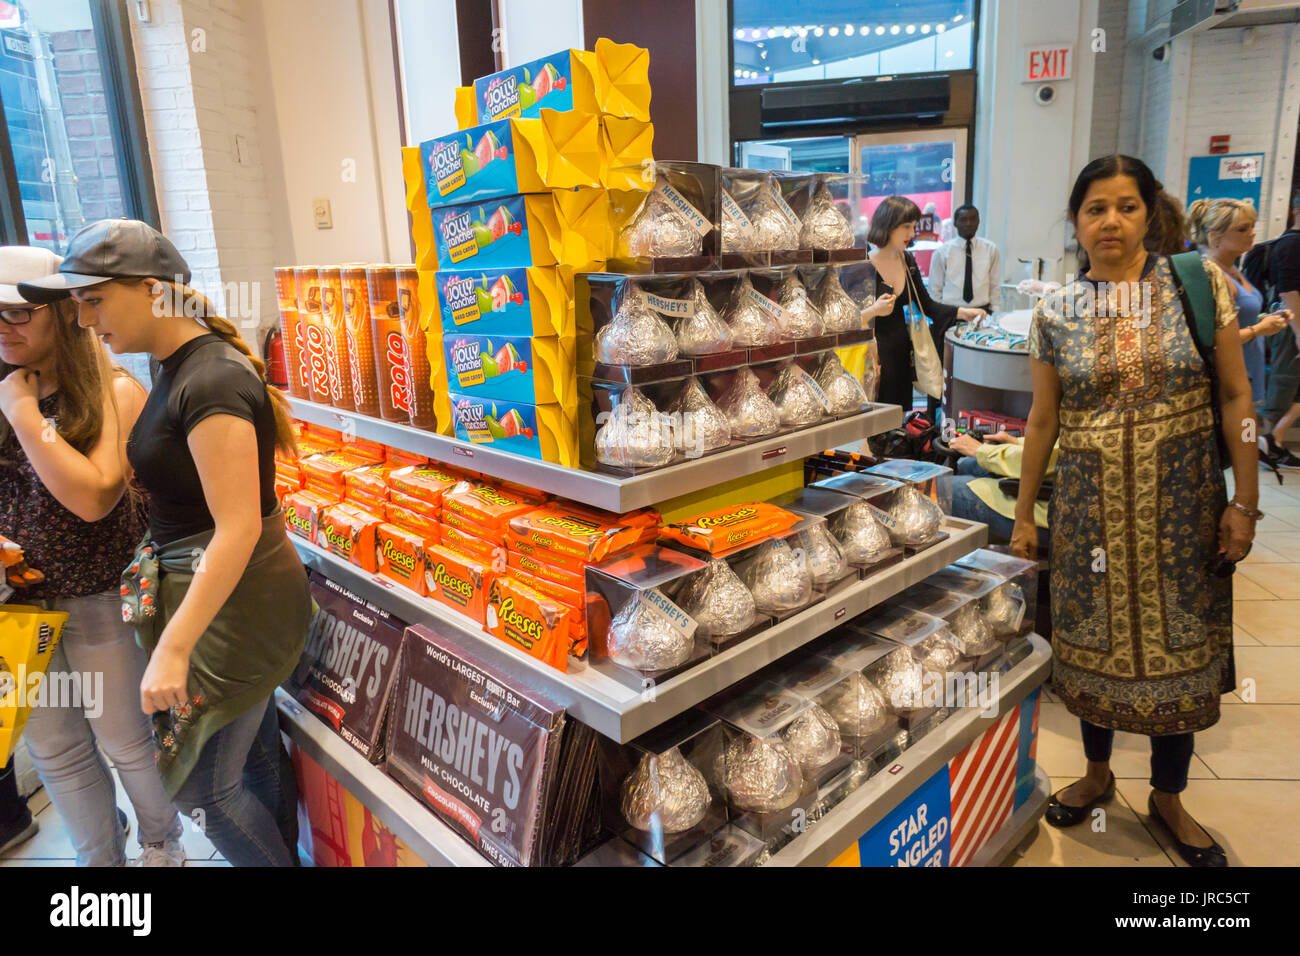 Tourists invade the Hershey Store in Times Square in New York on Thursday, July 27, 2017. The Hershey Co. recently reported second-quarter profit that beat analysts' expectations. Cost-cutting and the reinvention of products are cited. (© Richard B. Levine) Stock Photo